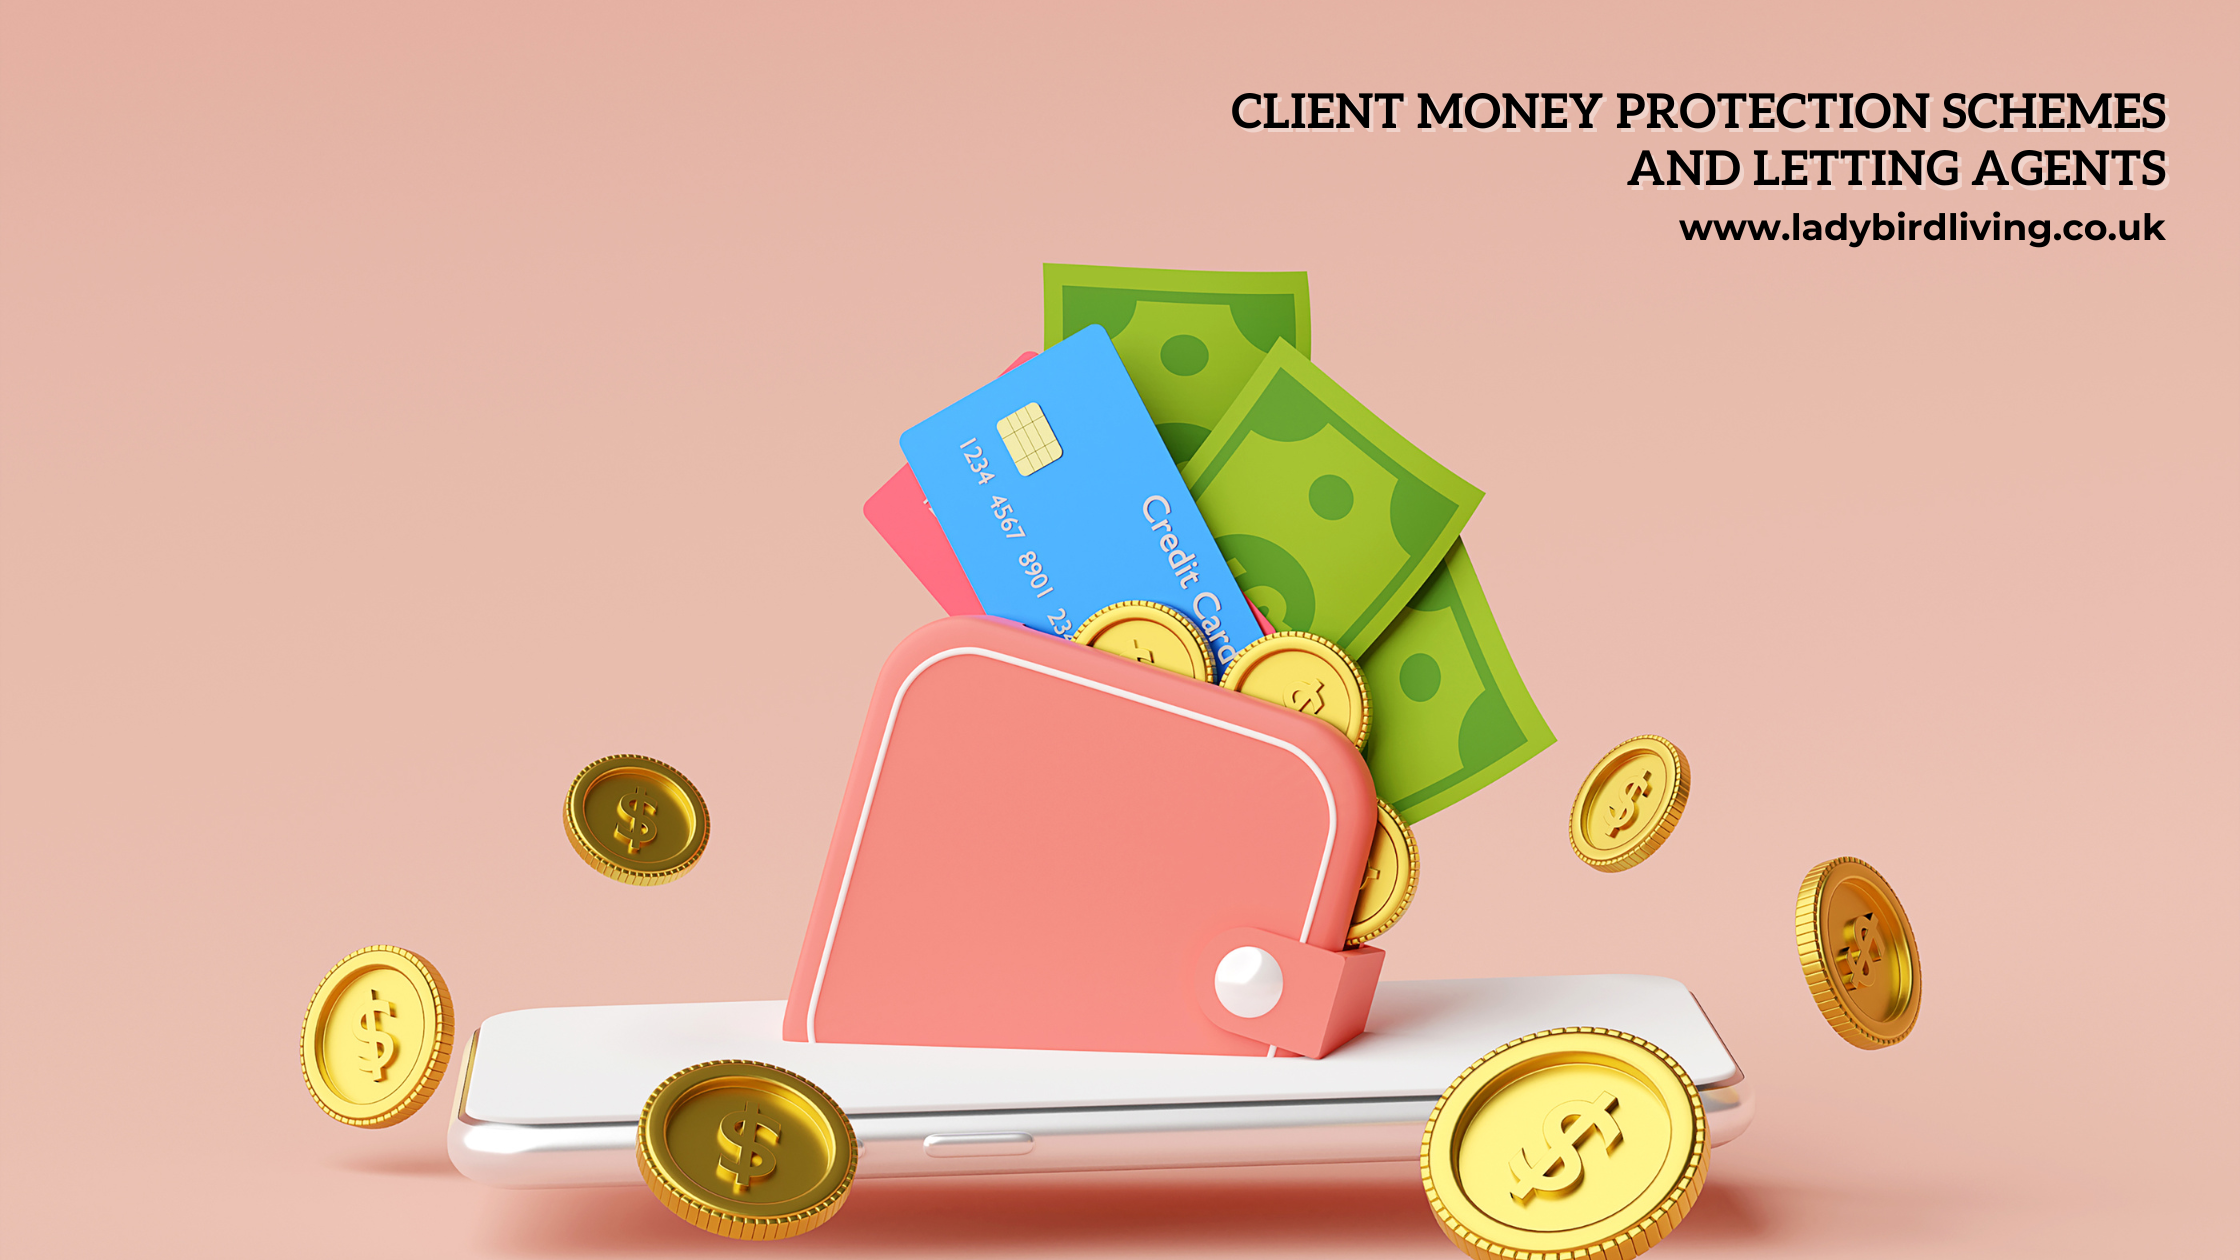 Client money protection schemes and letting agents